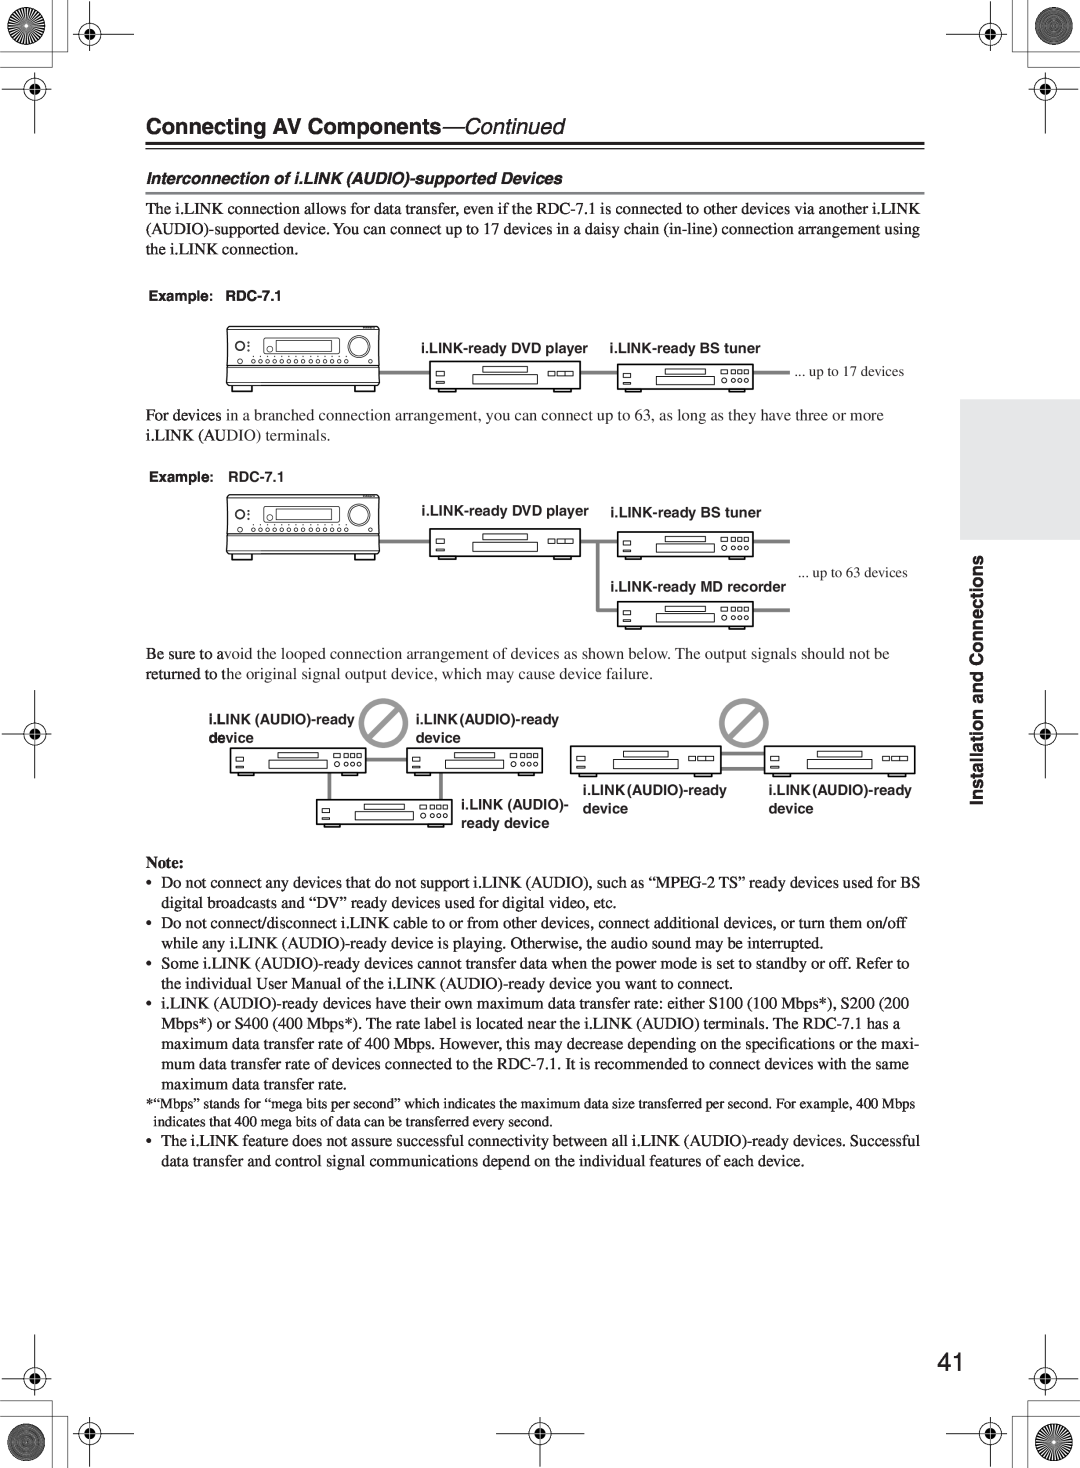 Integra RDC-7.1 instruction manual Interconnection of i.LINK AUDIO-supportedDevices, Connecting AV Components—Continued 